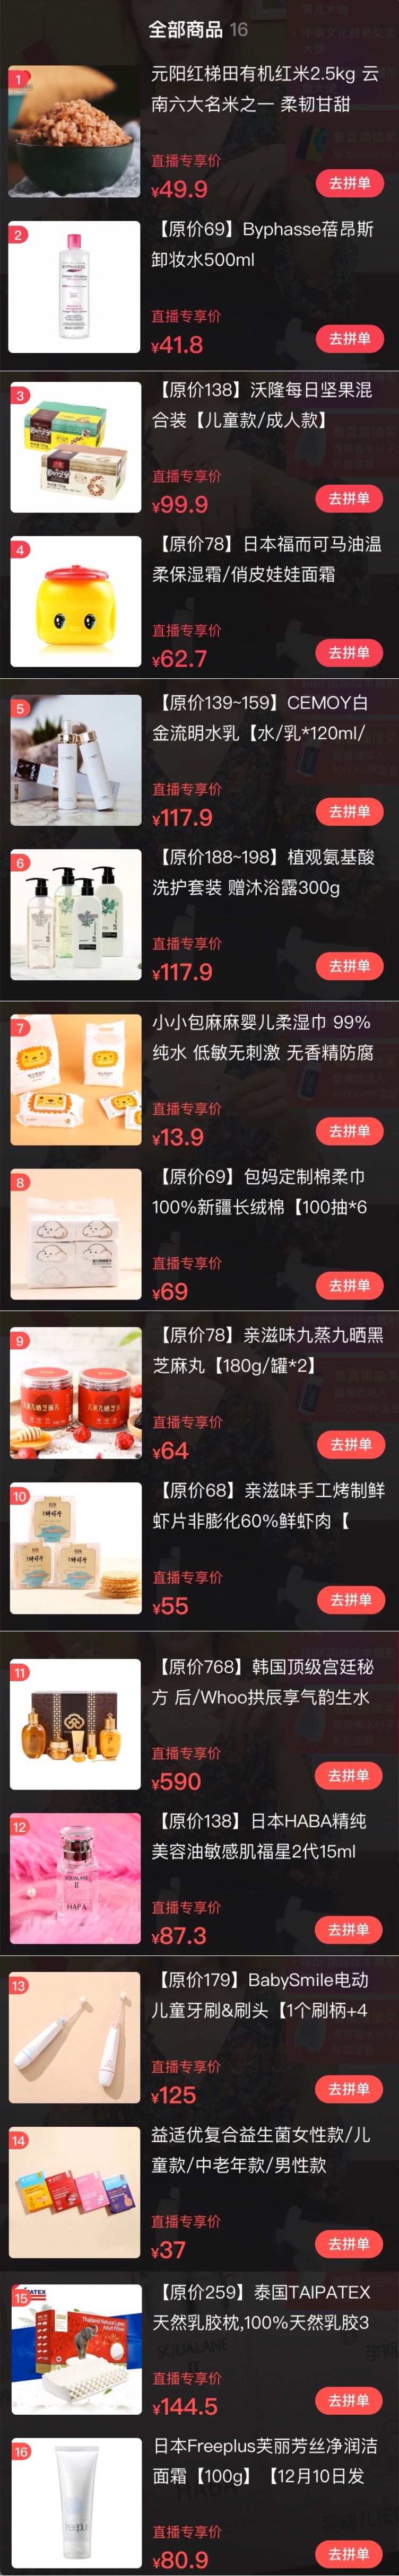 Frontline ｜ We observed the live broadcast of Pinduoduo and found 4 major differences from Taobao Live